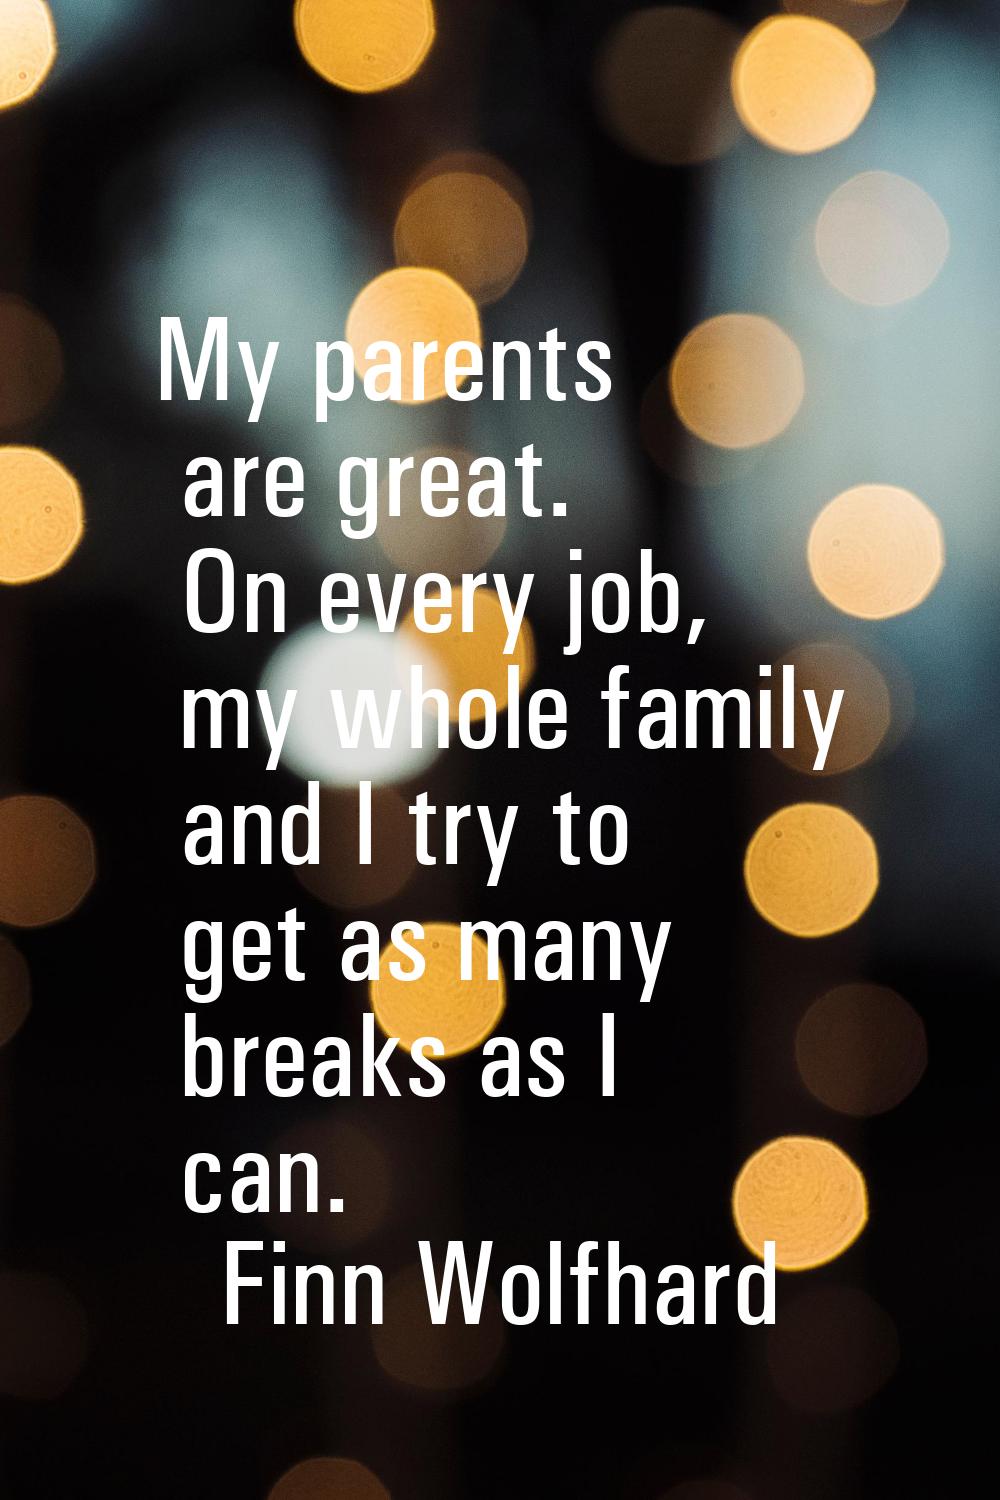 My parents are great. On every job, my whole family and I try to get as many breaks as I can.